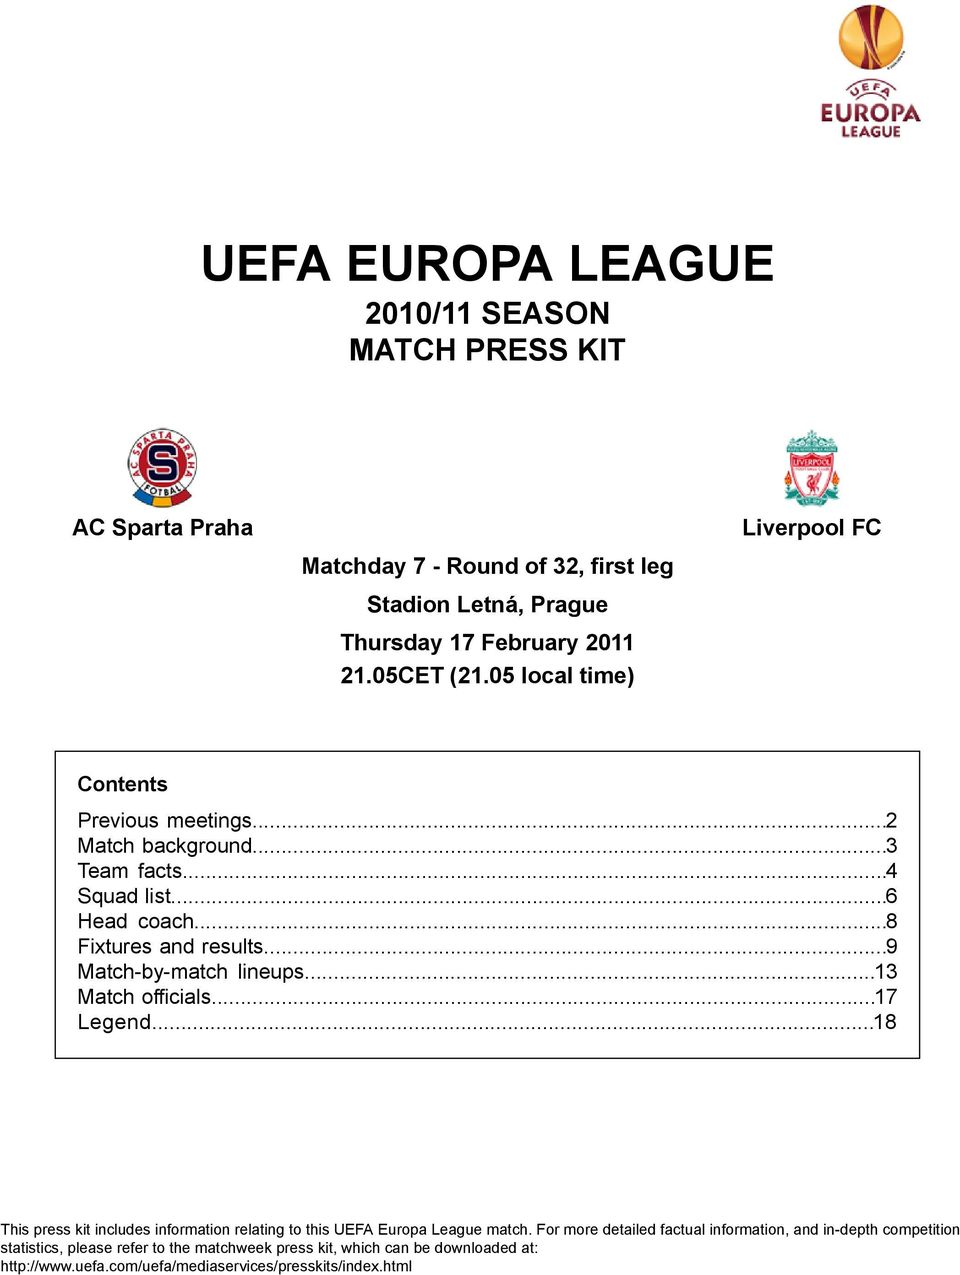 .. Matchbymatch lineups... Match officials... Legend... This press kit includes information relating to this UEFA Europa League match.